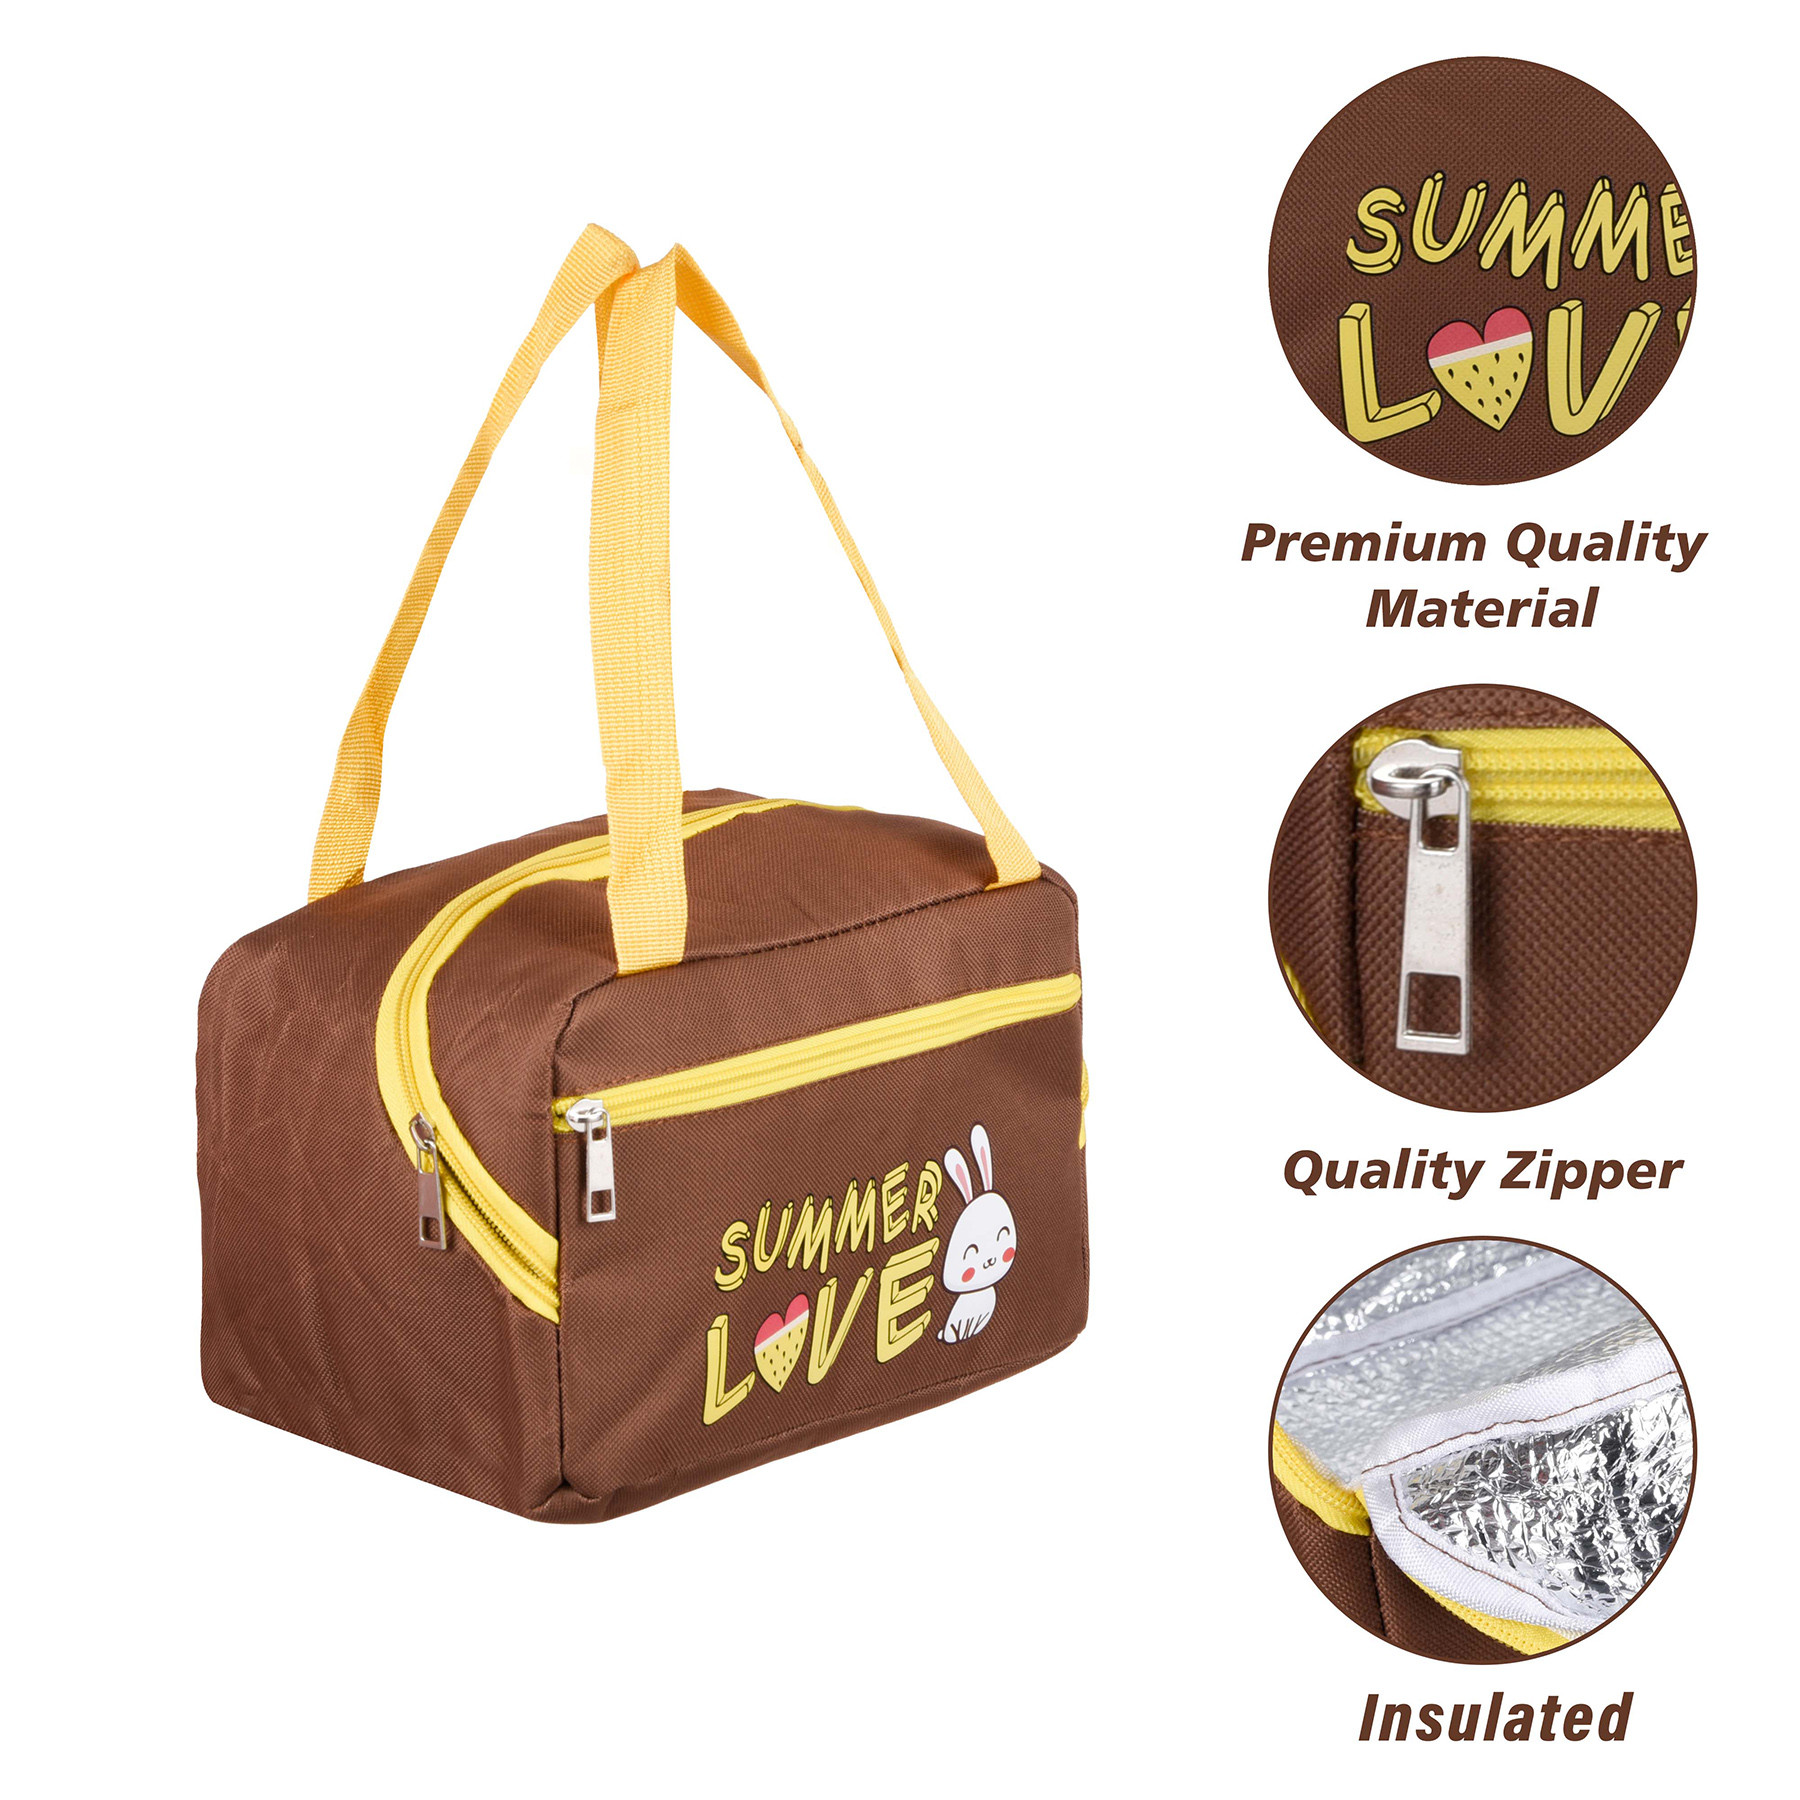 Kuber Industries Pack of 2 Lunch Bag | Insulated Lunch Bag | Lunch Bag for Office | Lunch Bag for Camping with Front Pocket | Waterproof Tiffin Cover with Handle | Summer Rabbit | Brown & Green